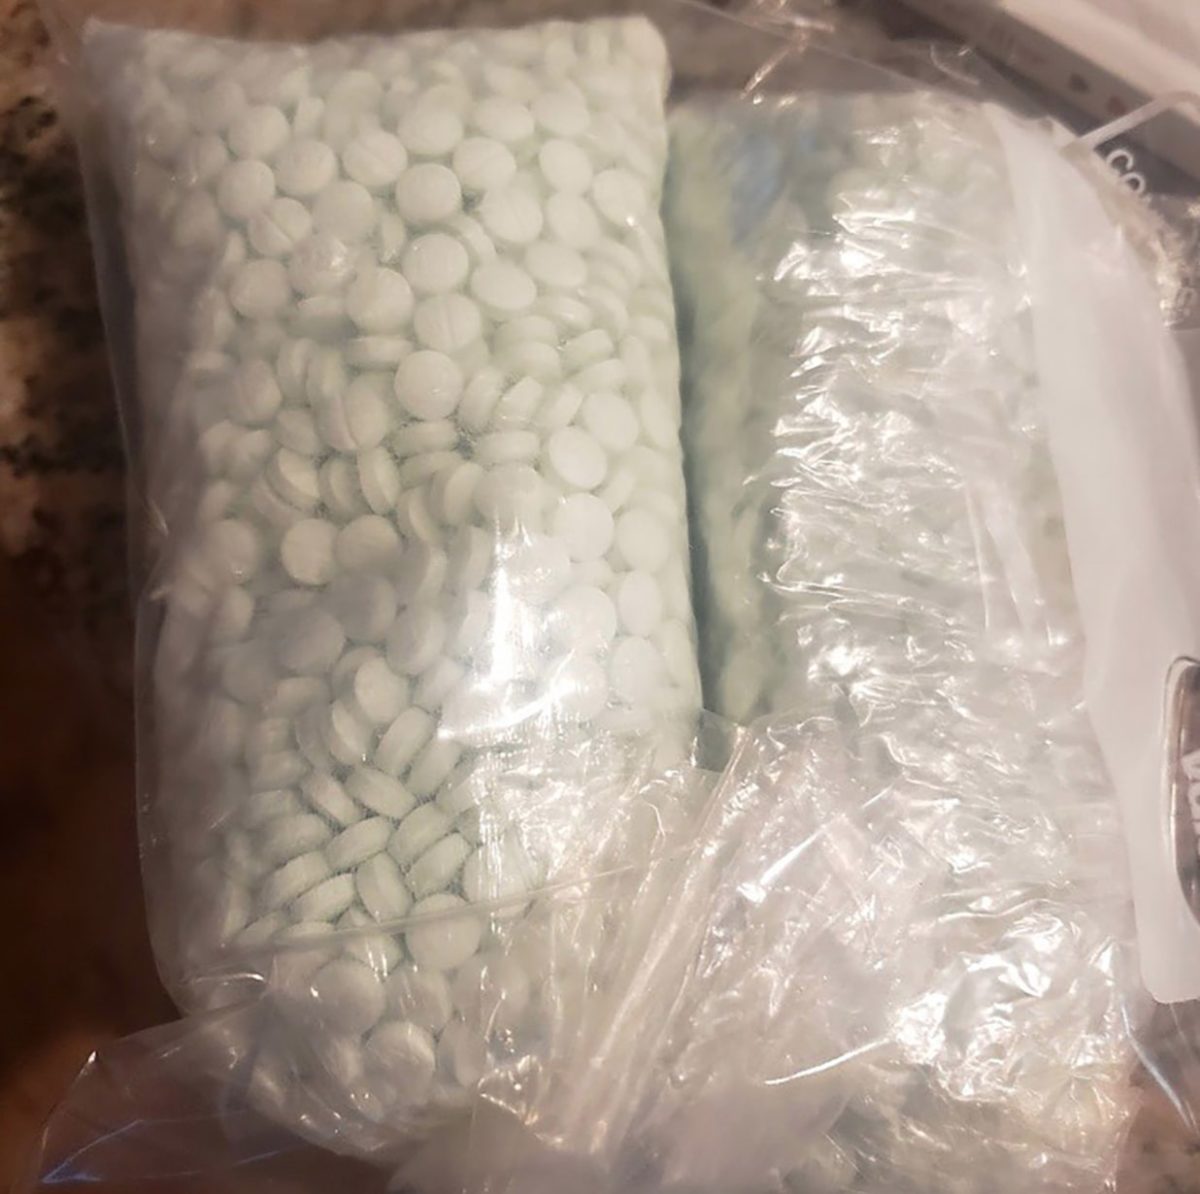 arizona parents discover over 5,000 fentanyl pills in toy